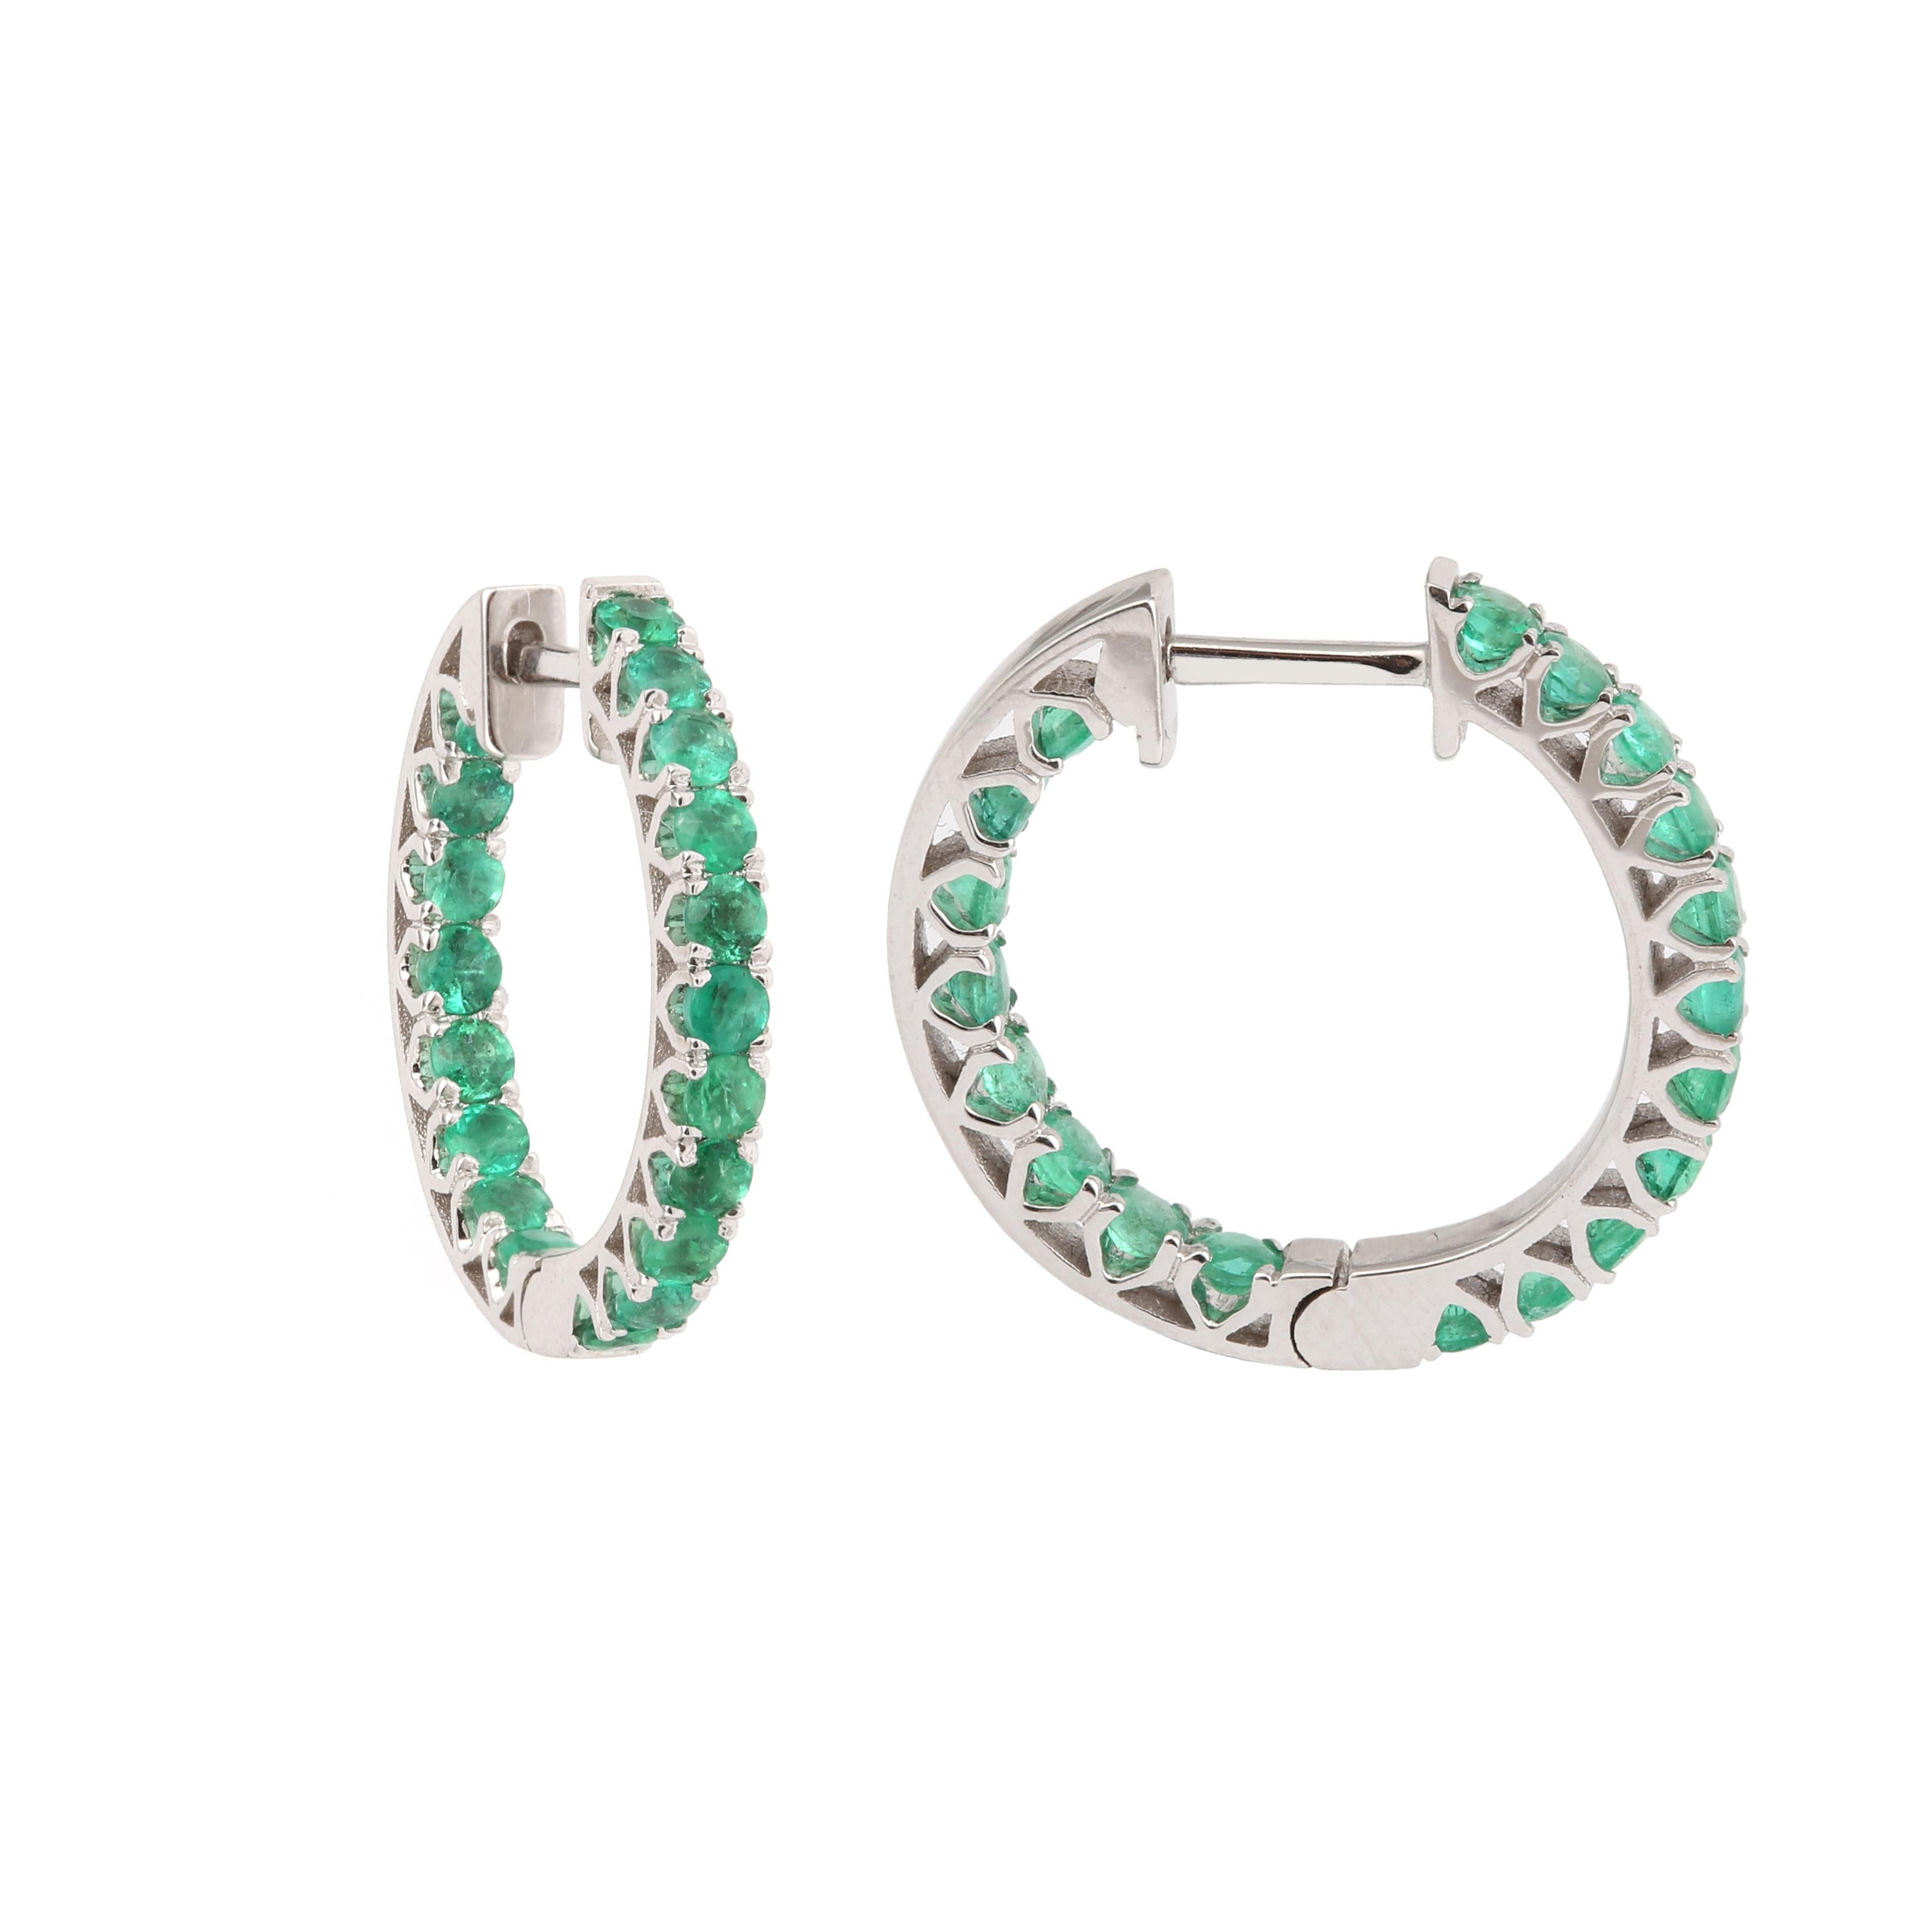 Elegant pair of white gold hoop earrings set with lines of emeralds.

Total weight of emeralds: 1.60 carats

Dimensions : 19.24 x 19.91 x 2.44 mm (0.757 x 0.784 x 0.096 inch)

Total weight of the pair: 4.60 g

18 carat white gold, 750/1000th